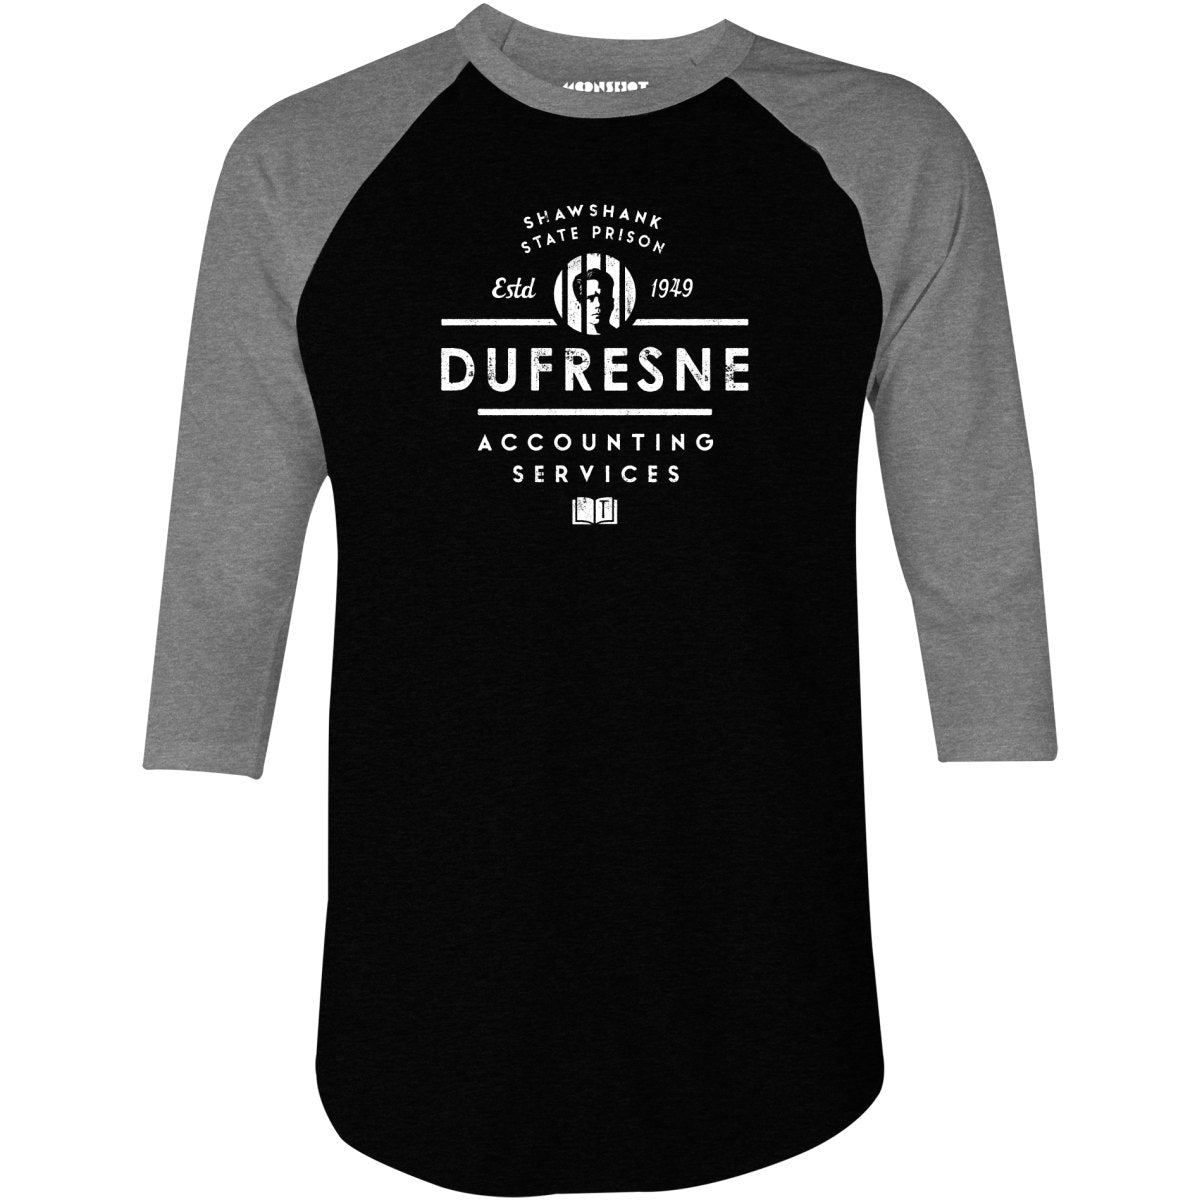 Dufresne Accounting Services - 3/4 Sleeve Raglan T-Shirt